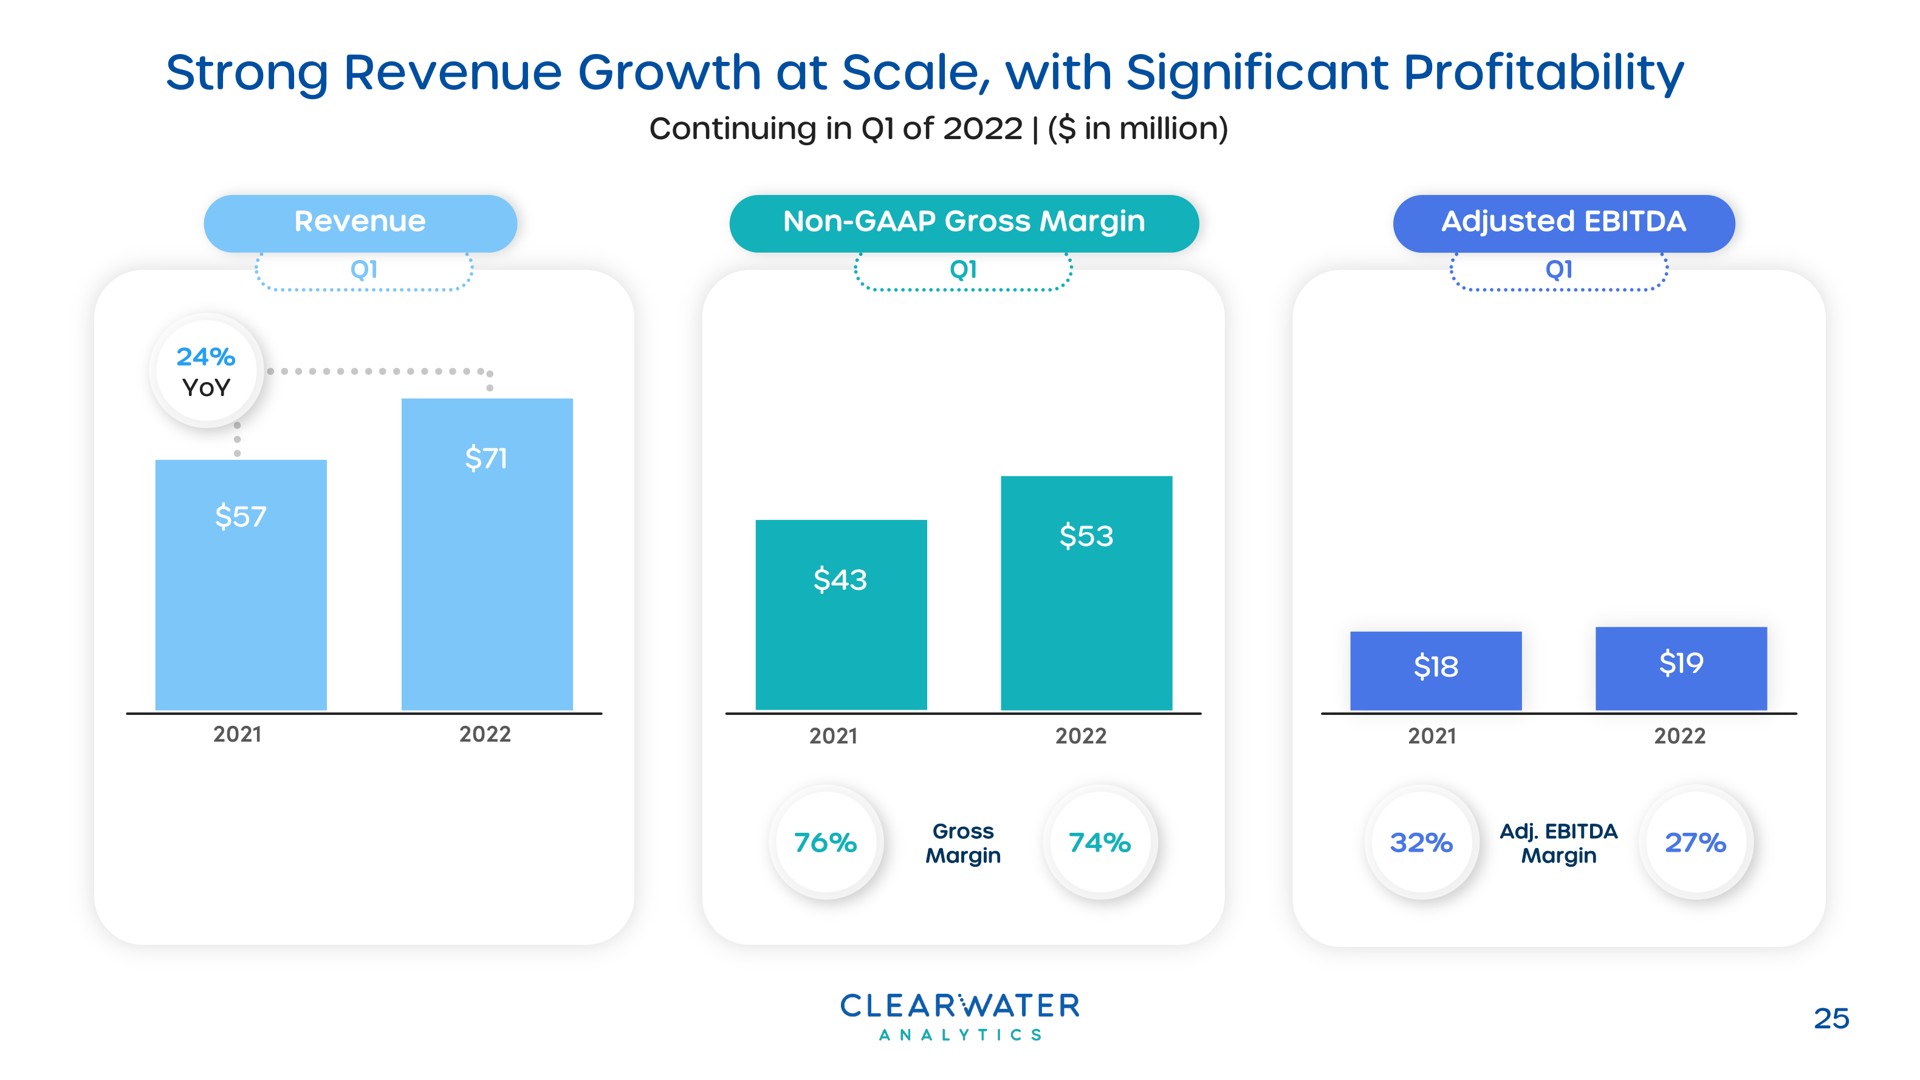 strong revenue growth at scale with significant profitability | Clearwater Analytics